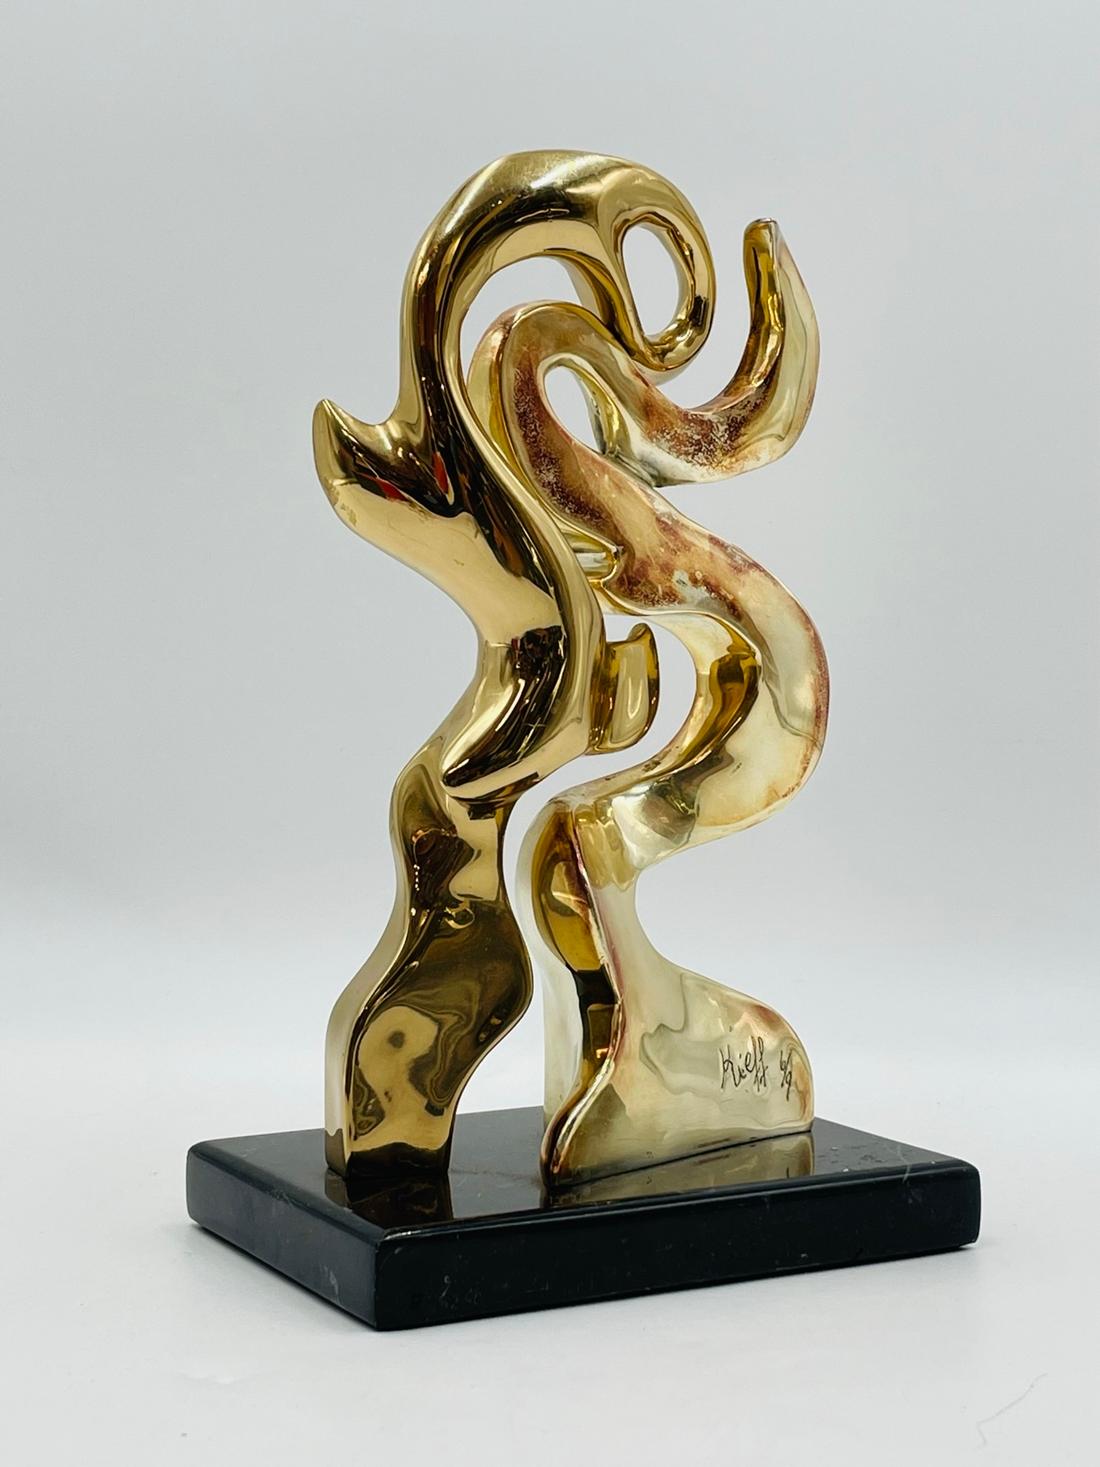 Introducing the Bronze Sculpture by Kieff Grediaga, a stunning piece of art that will elevate your home or office decor. This exquisite sculpture features two connected lines that intertwine beautifully, creating a sense of movement and harmony.